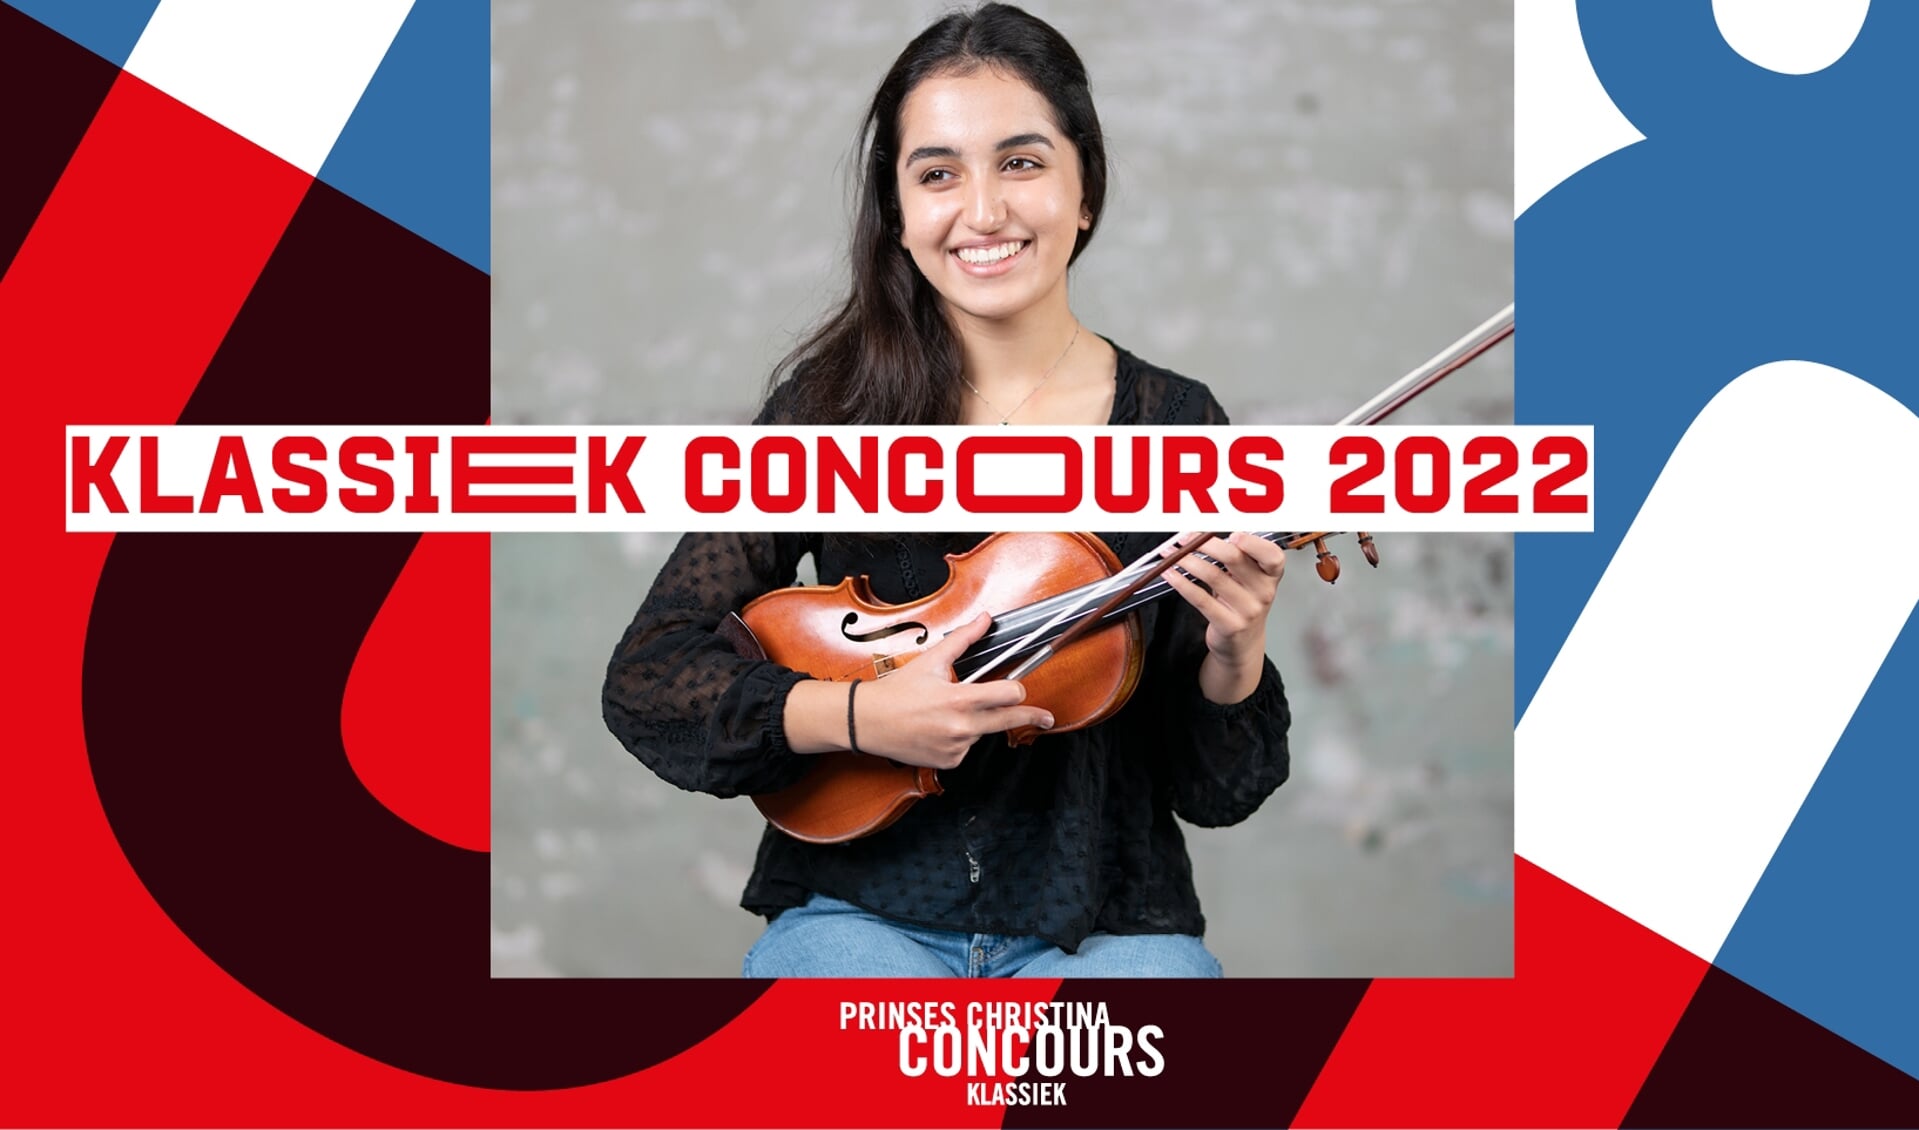 Diana Fakour; model campagne 2022